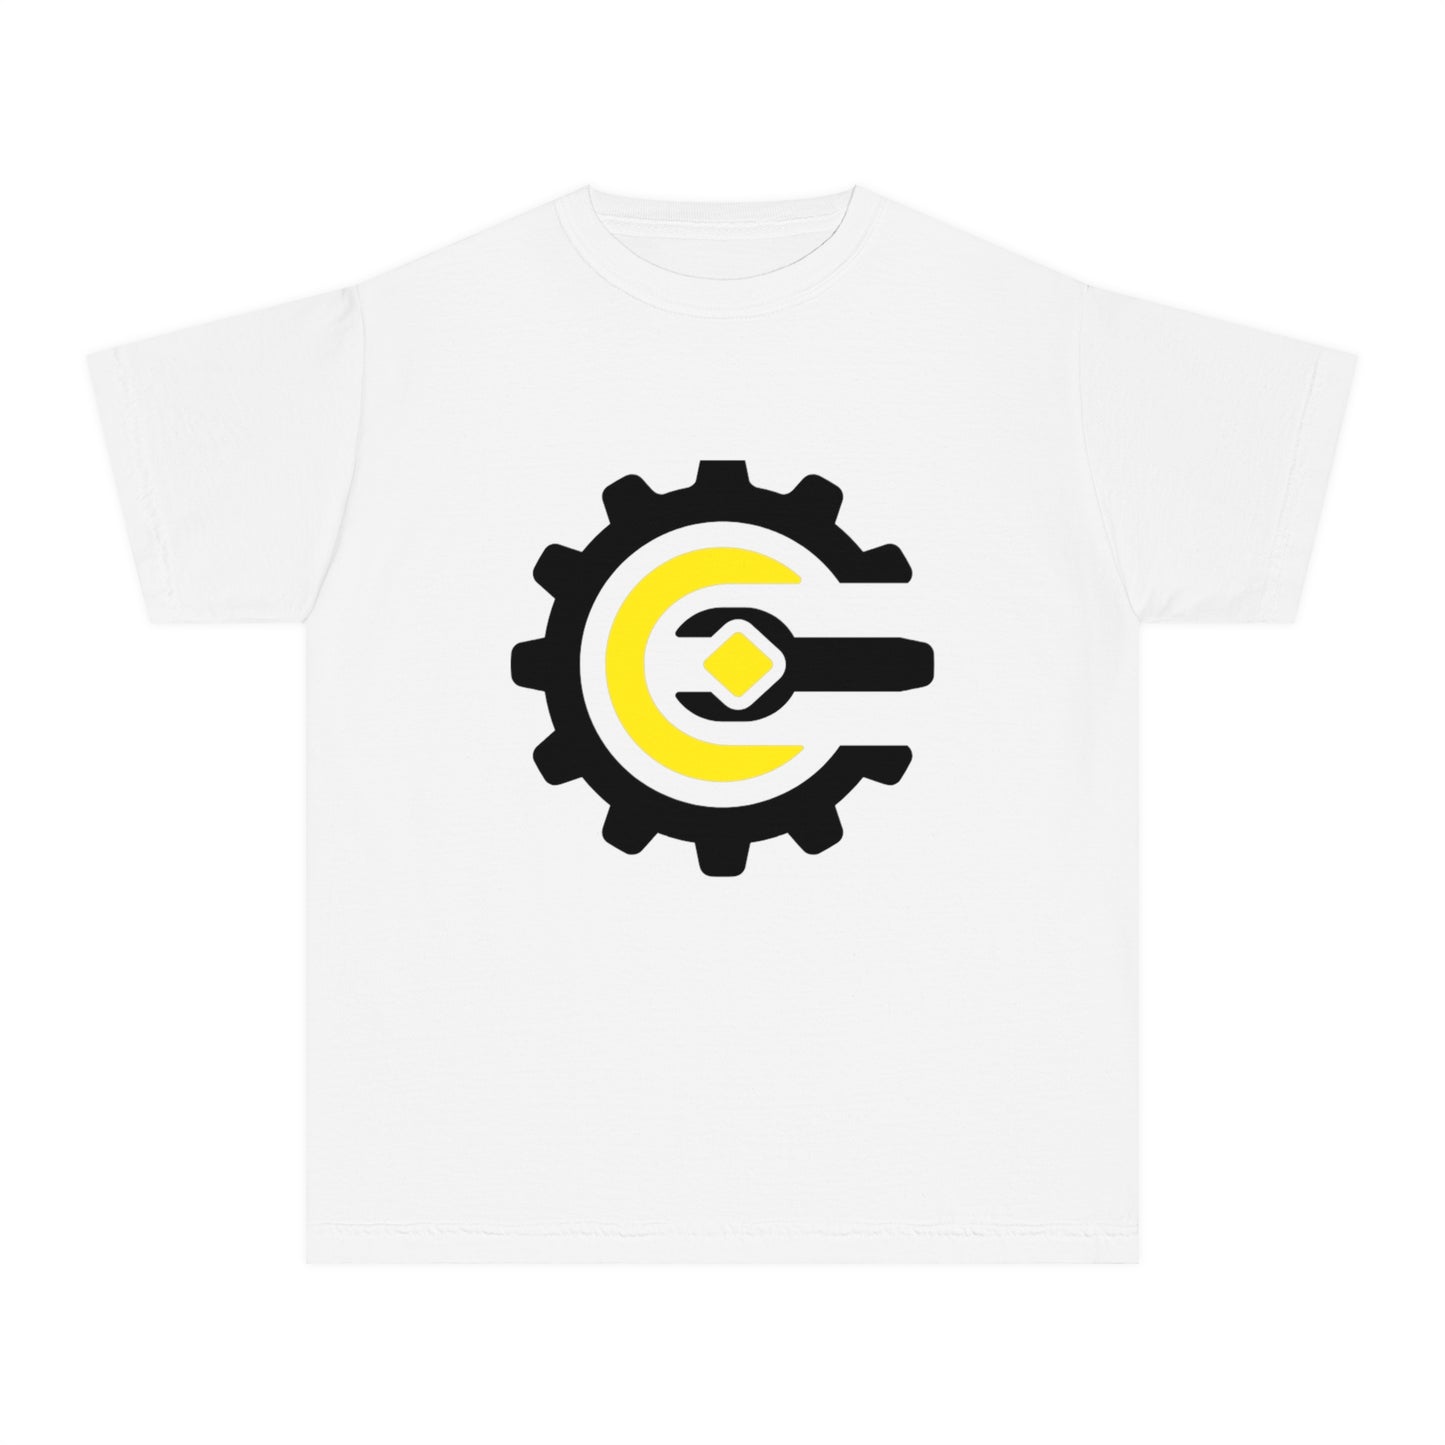 Youth "College & Career Gear" T-Shirt